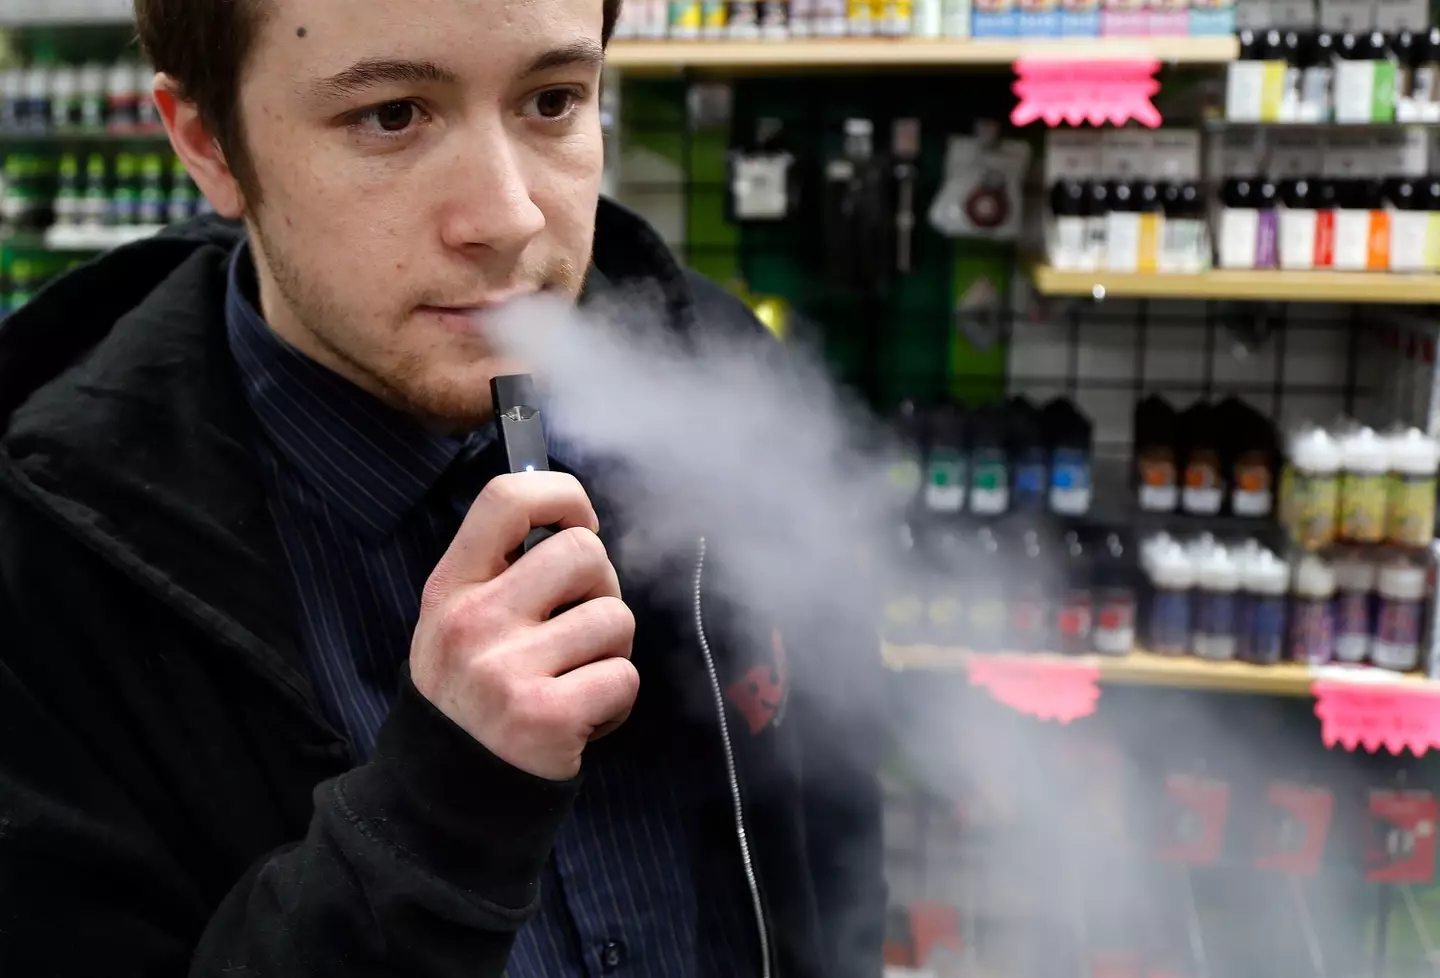 "Juul is paying for widespread harm caused."